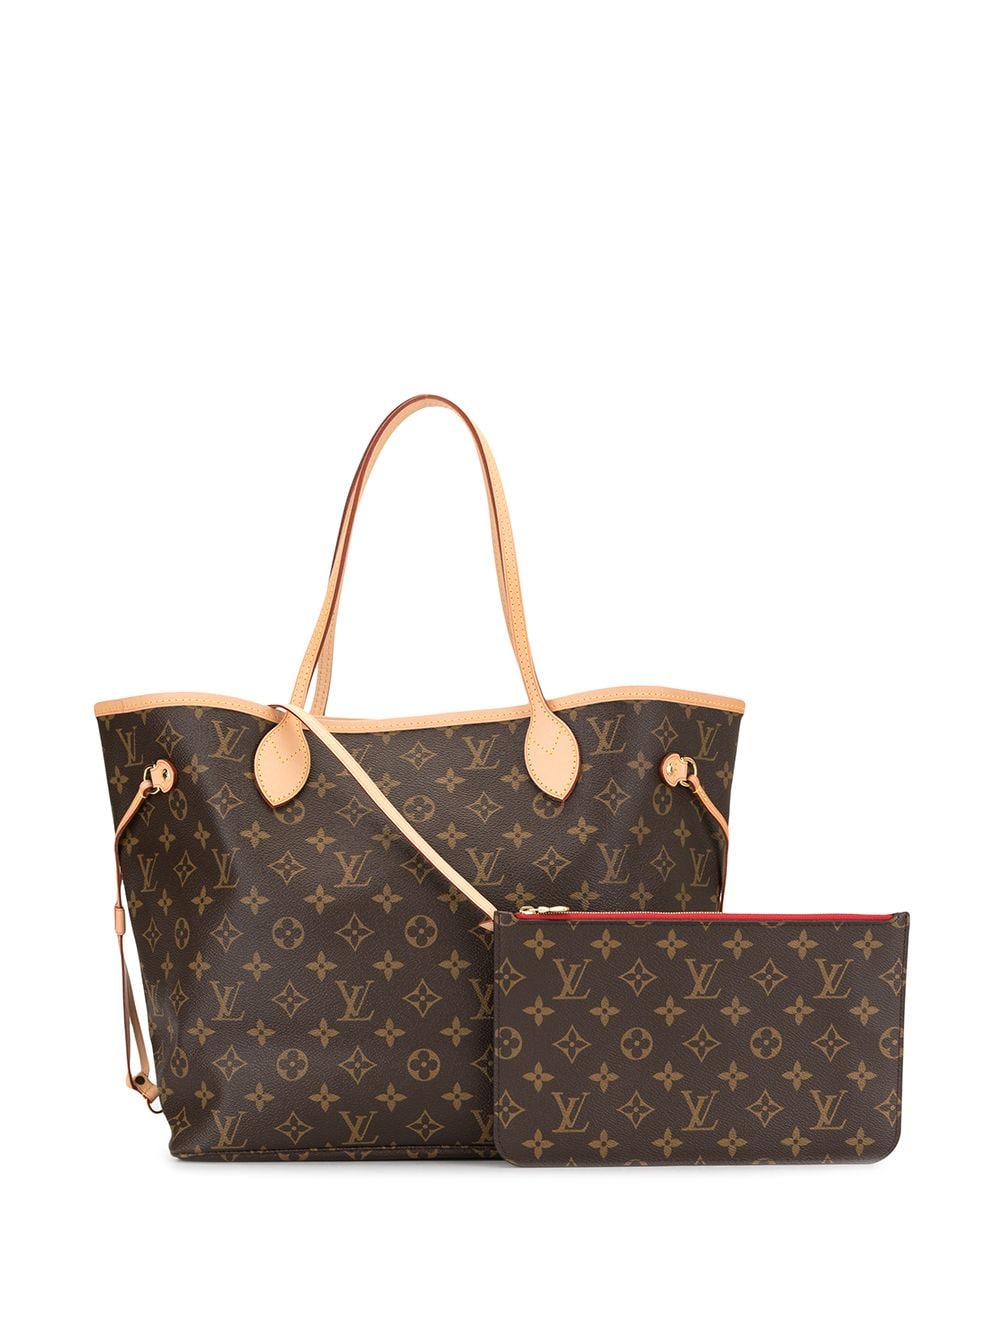 Louis Vuitton 2017 pre-owned Tuileries Tote Bag - Farfetch